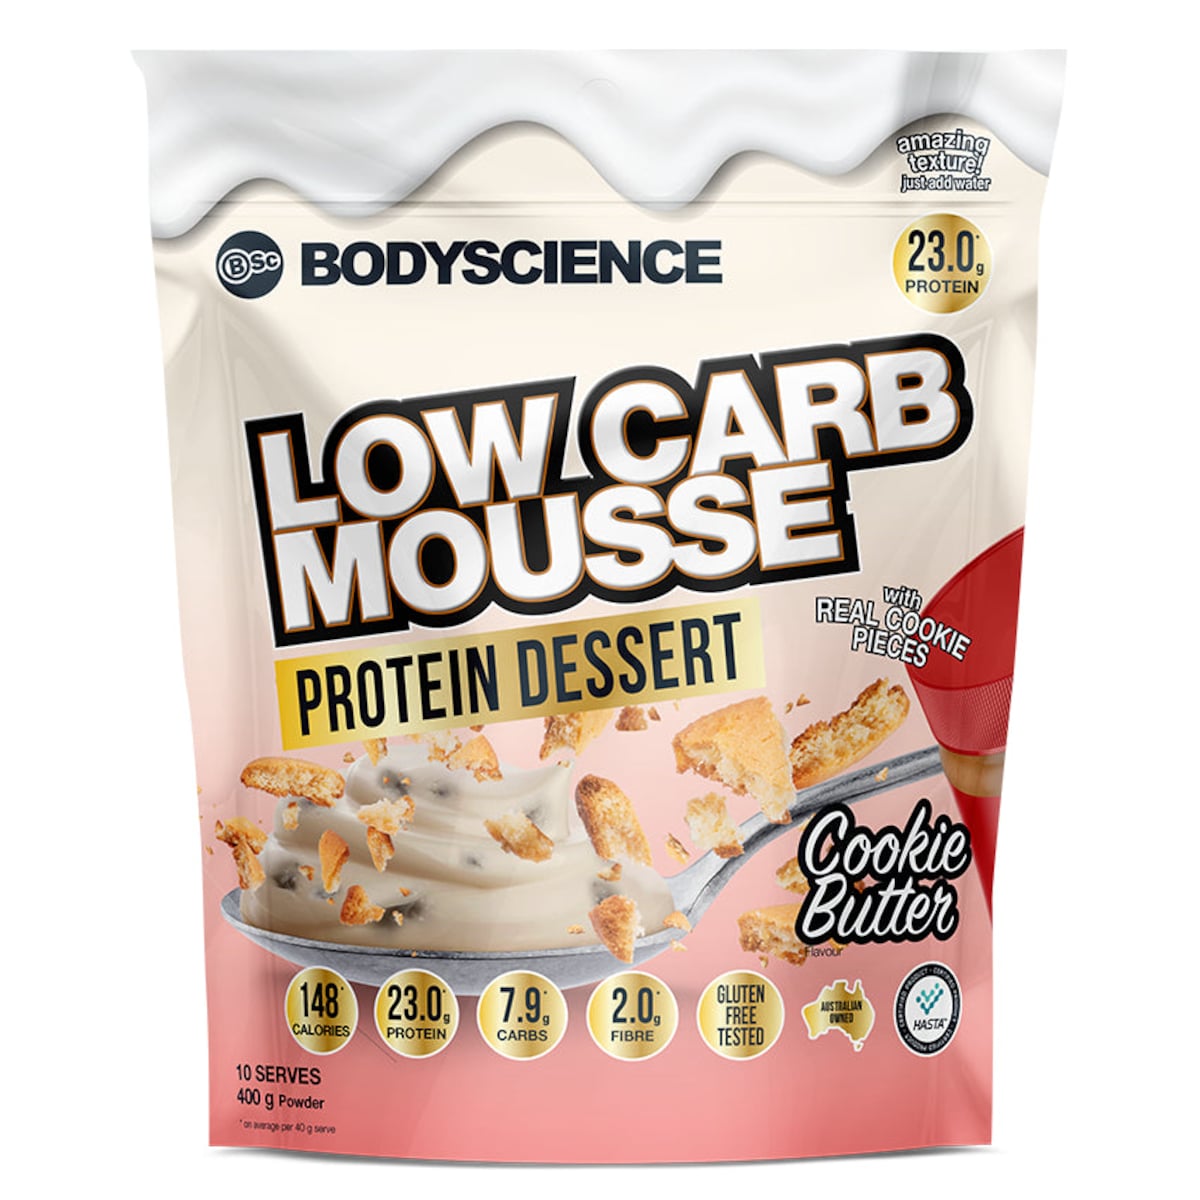 BSc Body Science Low Carb Mousse Protein Dessert Cookie Butter 400g